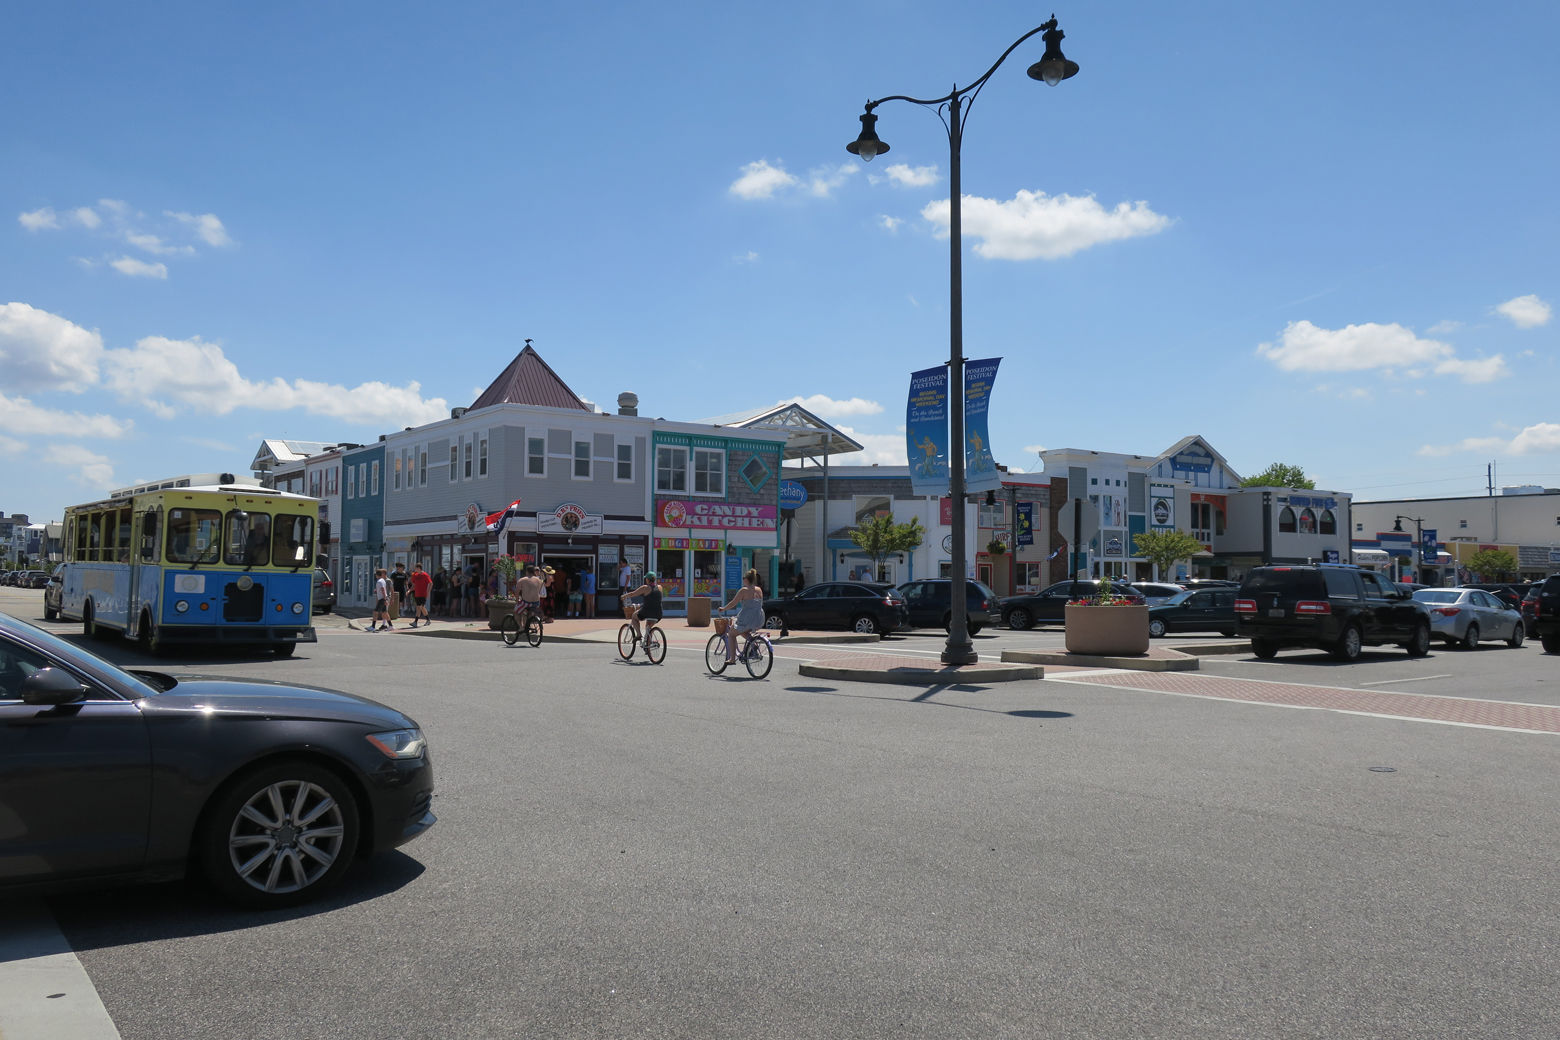 Bethany Beach street with people biking and the trolley is seen